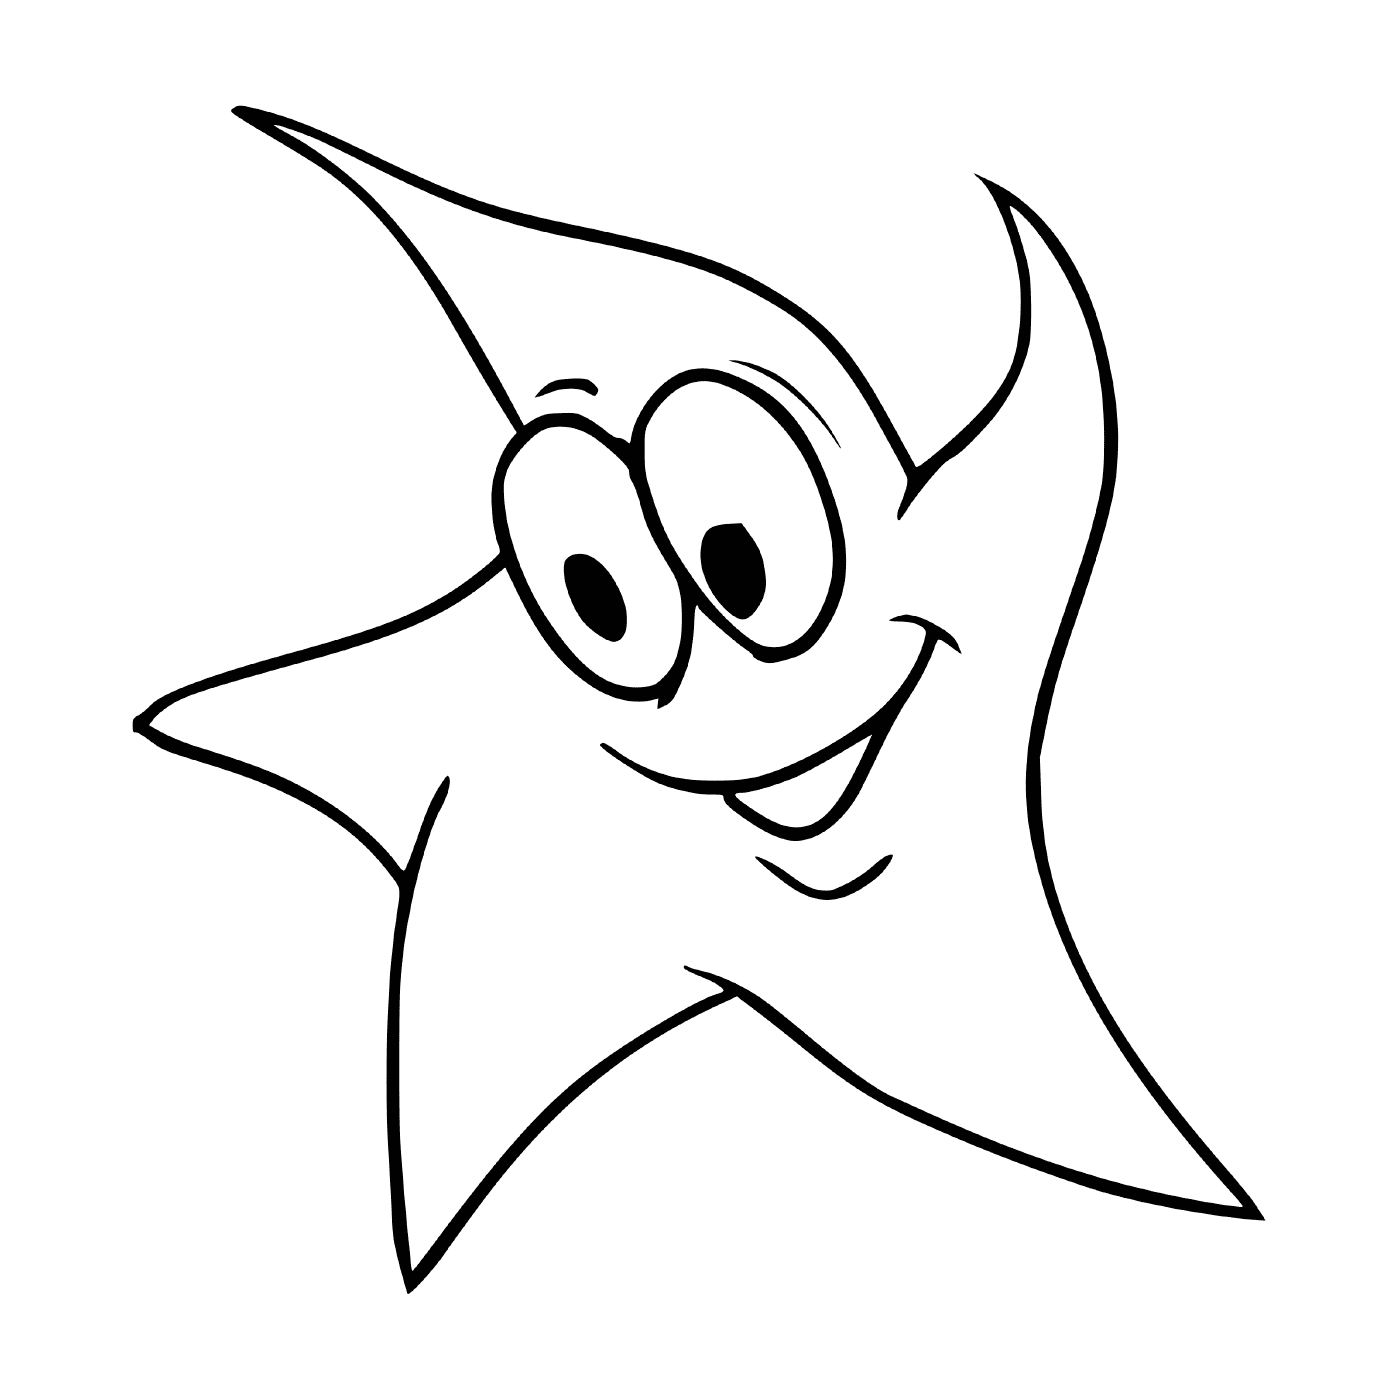  A cute and smiling star of the sea 